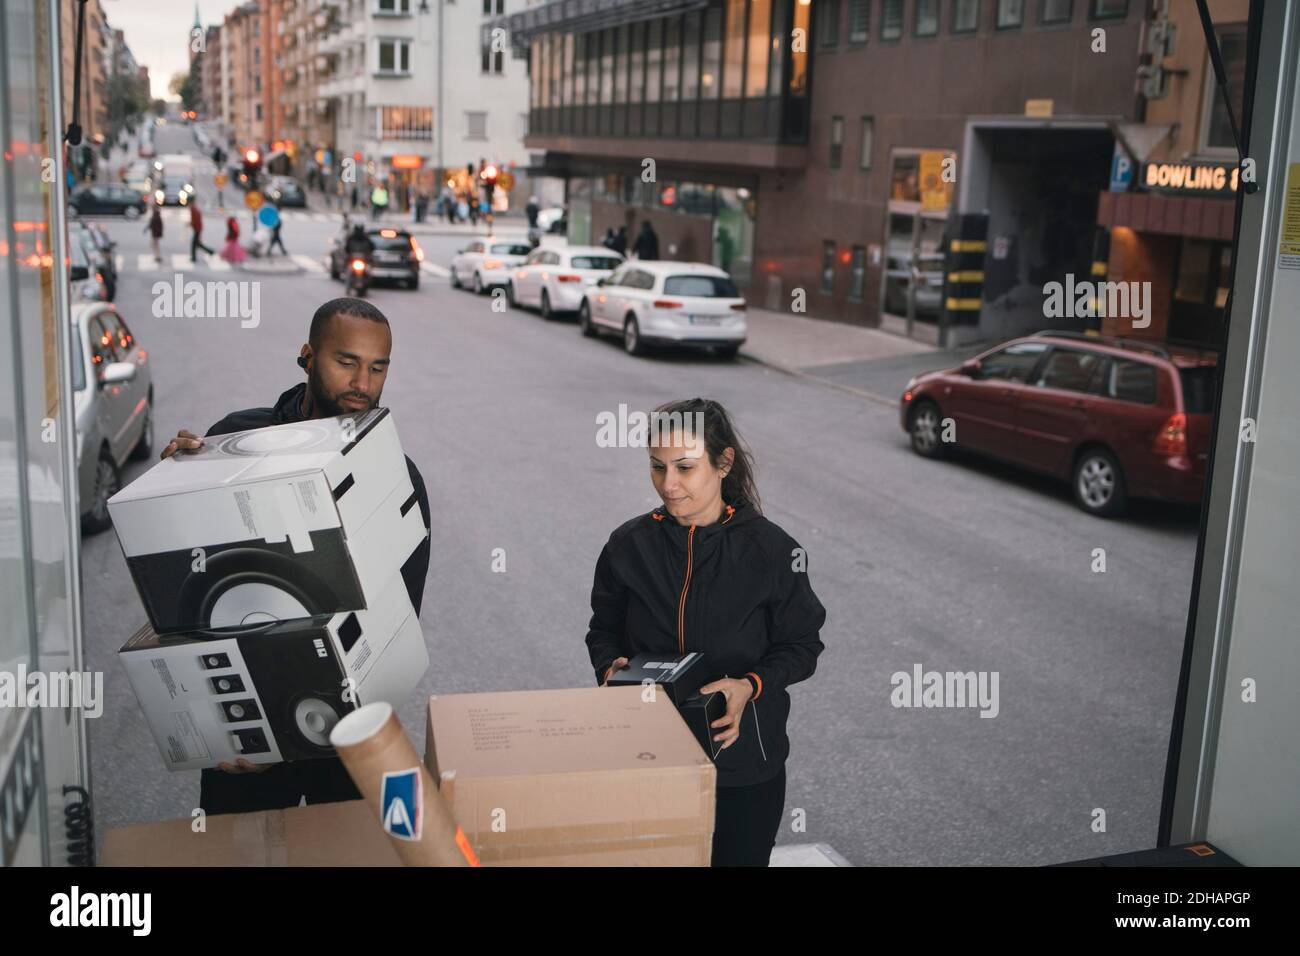 Male and female workers are stacking cardboard boxes in delivery van Stock Photo